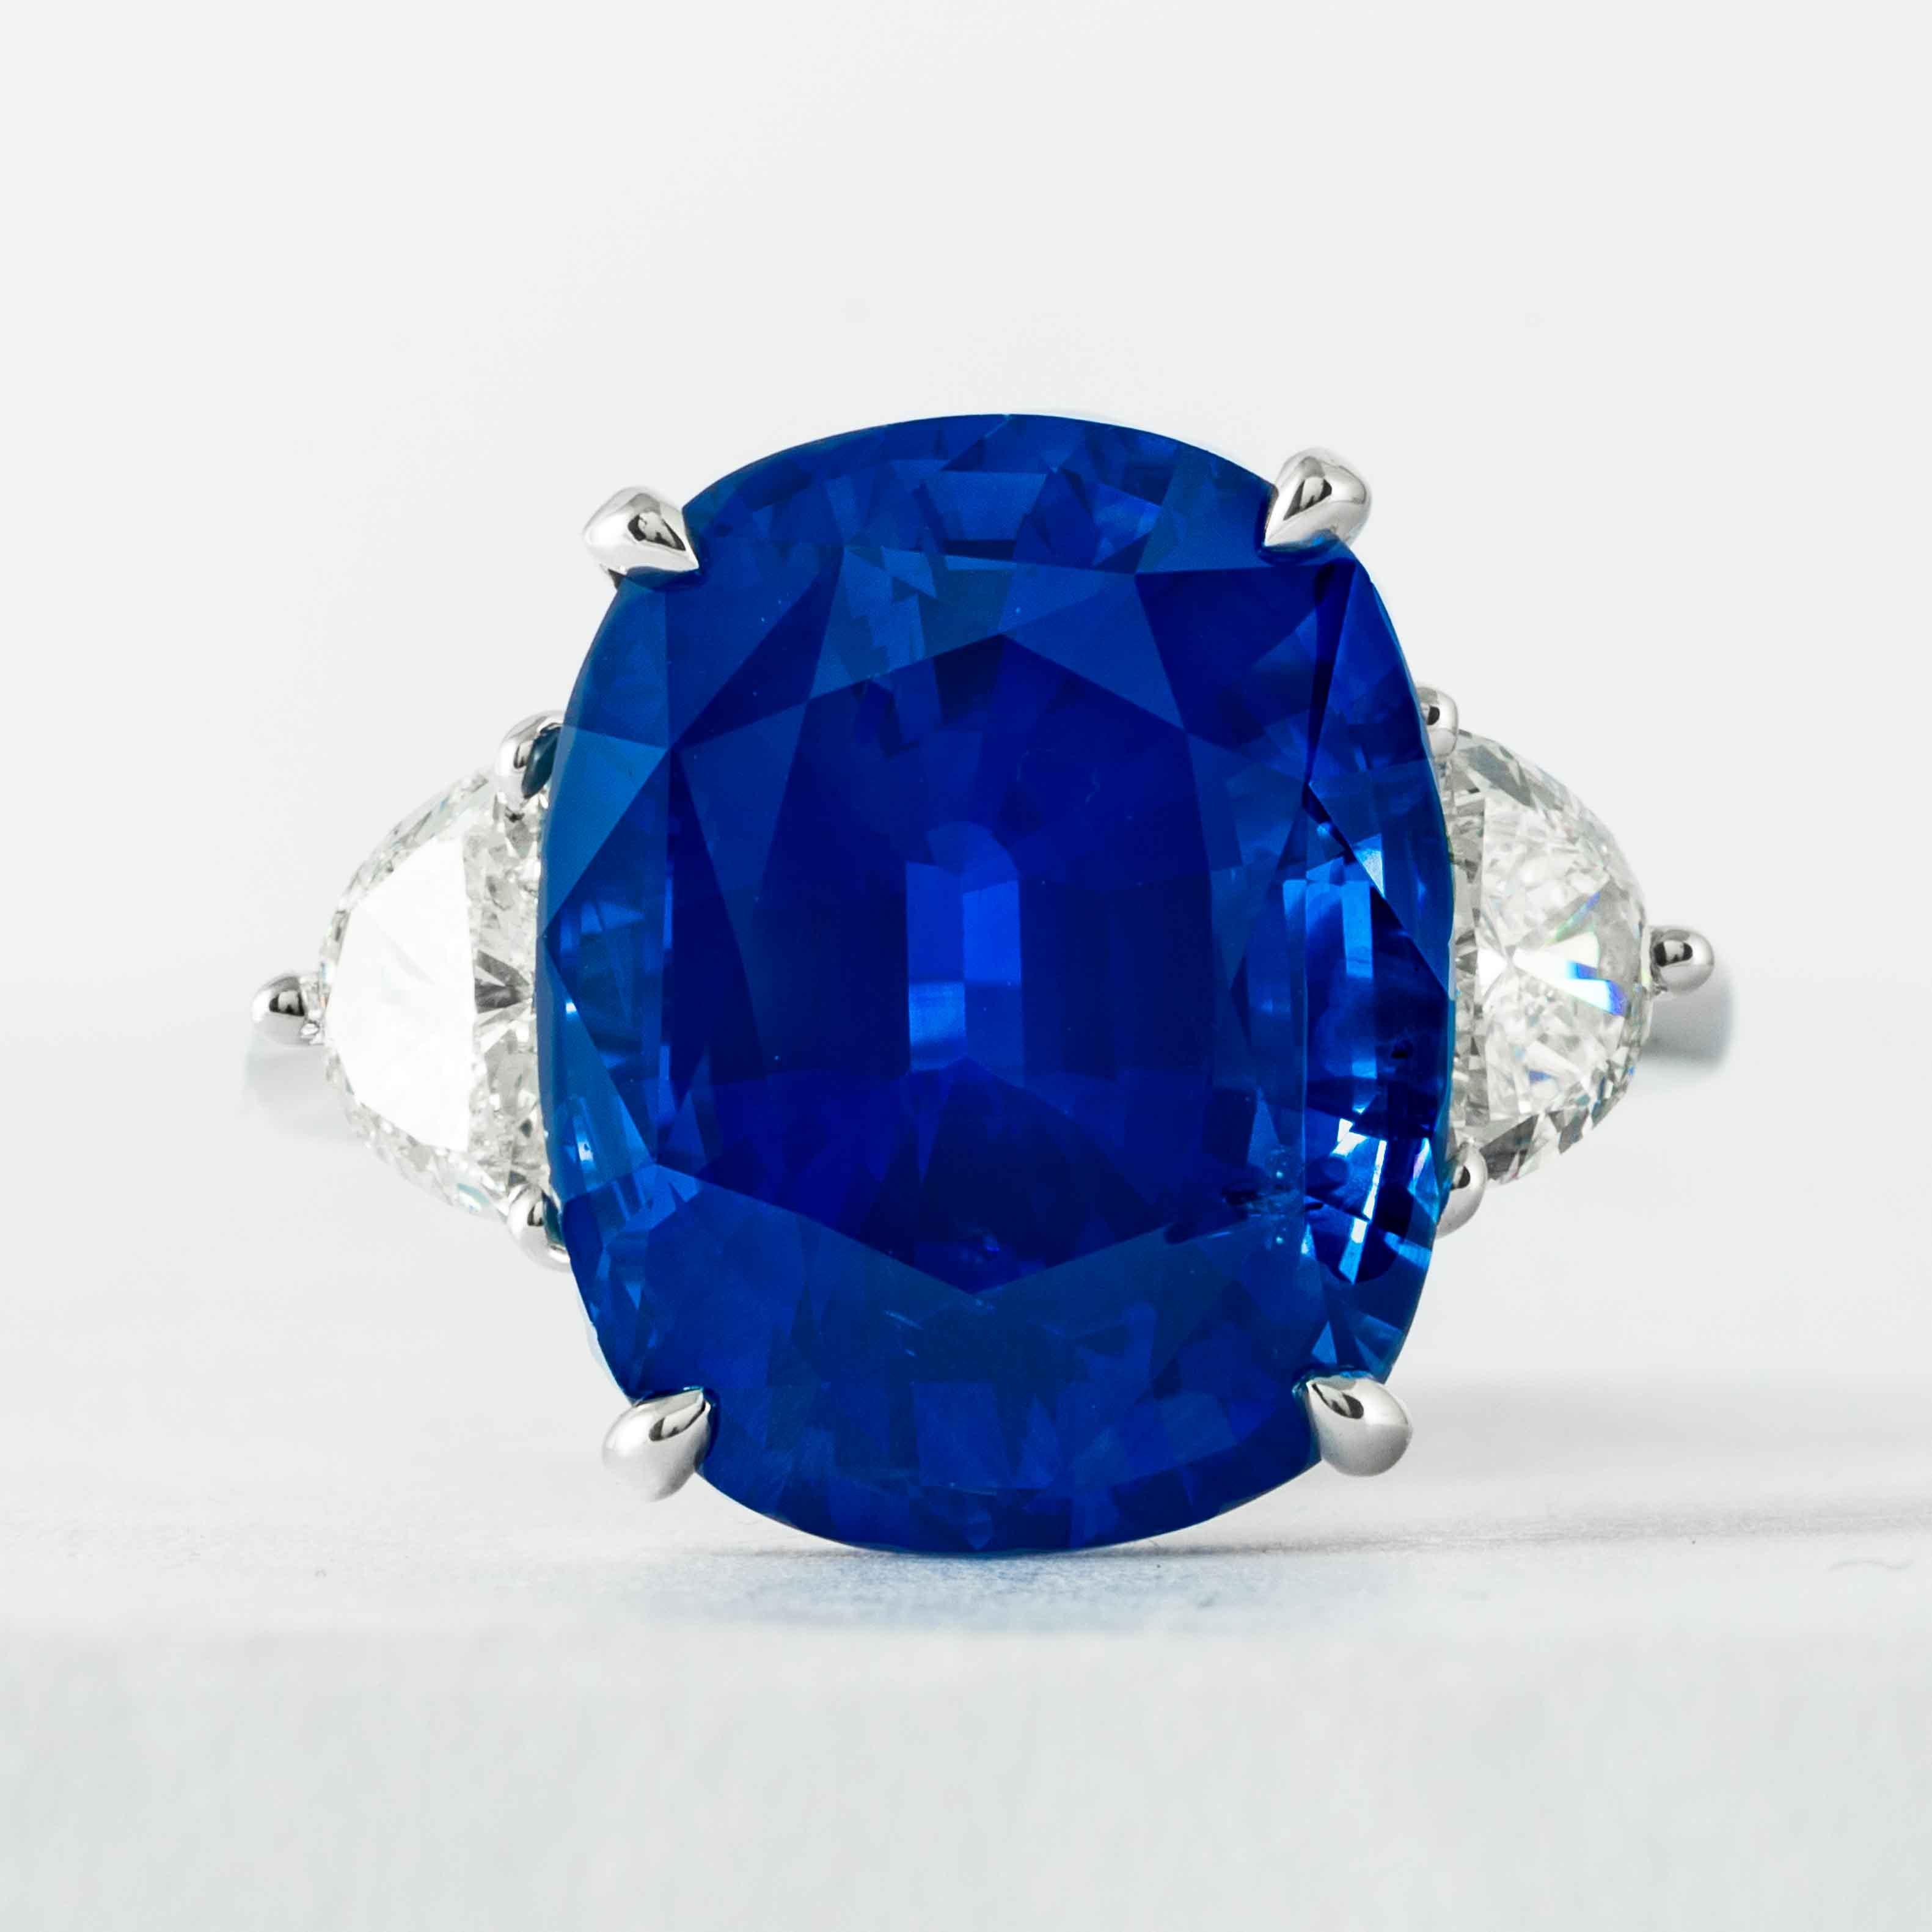 This sapphire and diamond 3-stone ring is offered by Shreve, Crump & Low.  This blue cushion cut sapphire measuring 15.06 x 12.18 x 8.25mm is custom set in a handcrafted Shreve, Crump & Low one-of-kind platinum 3-stone ring, consisting of 1